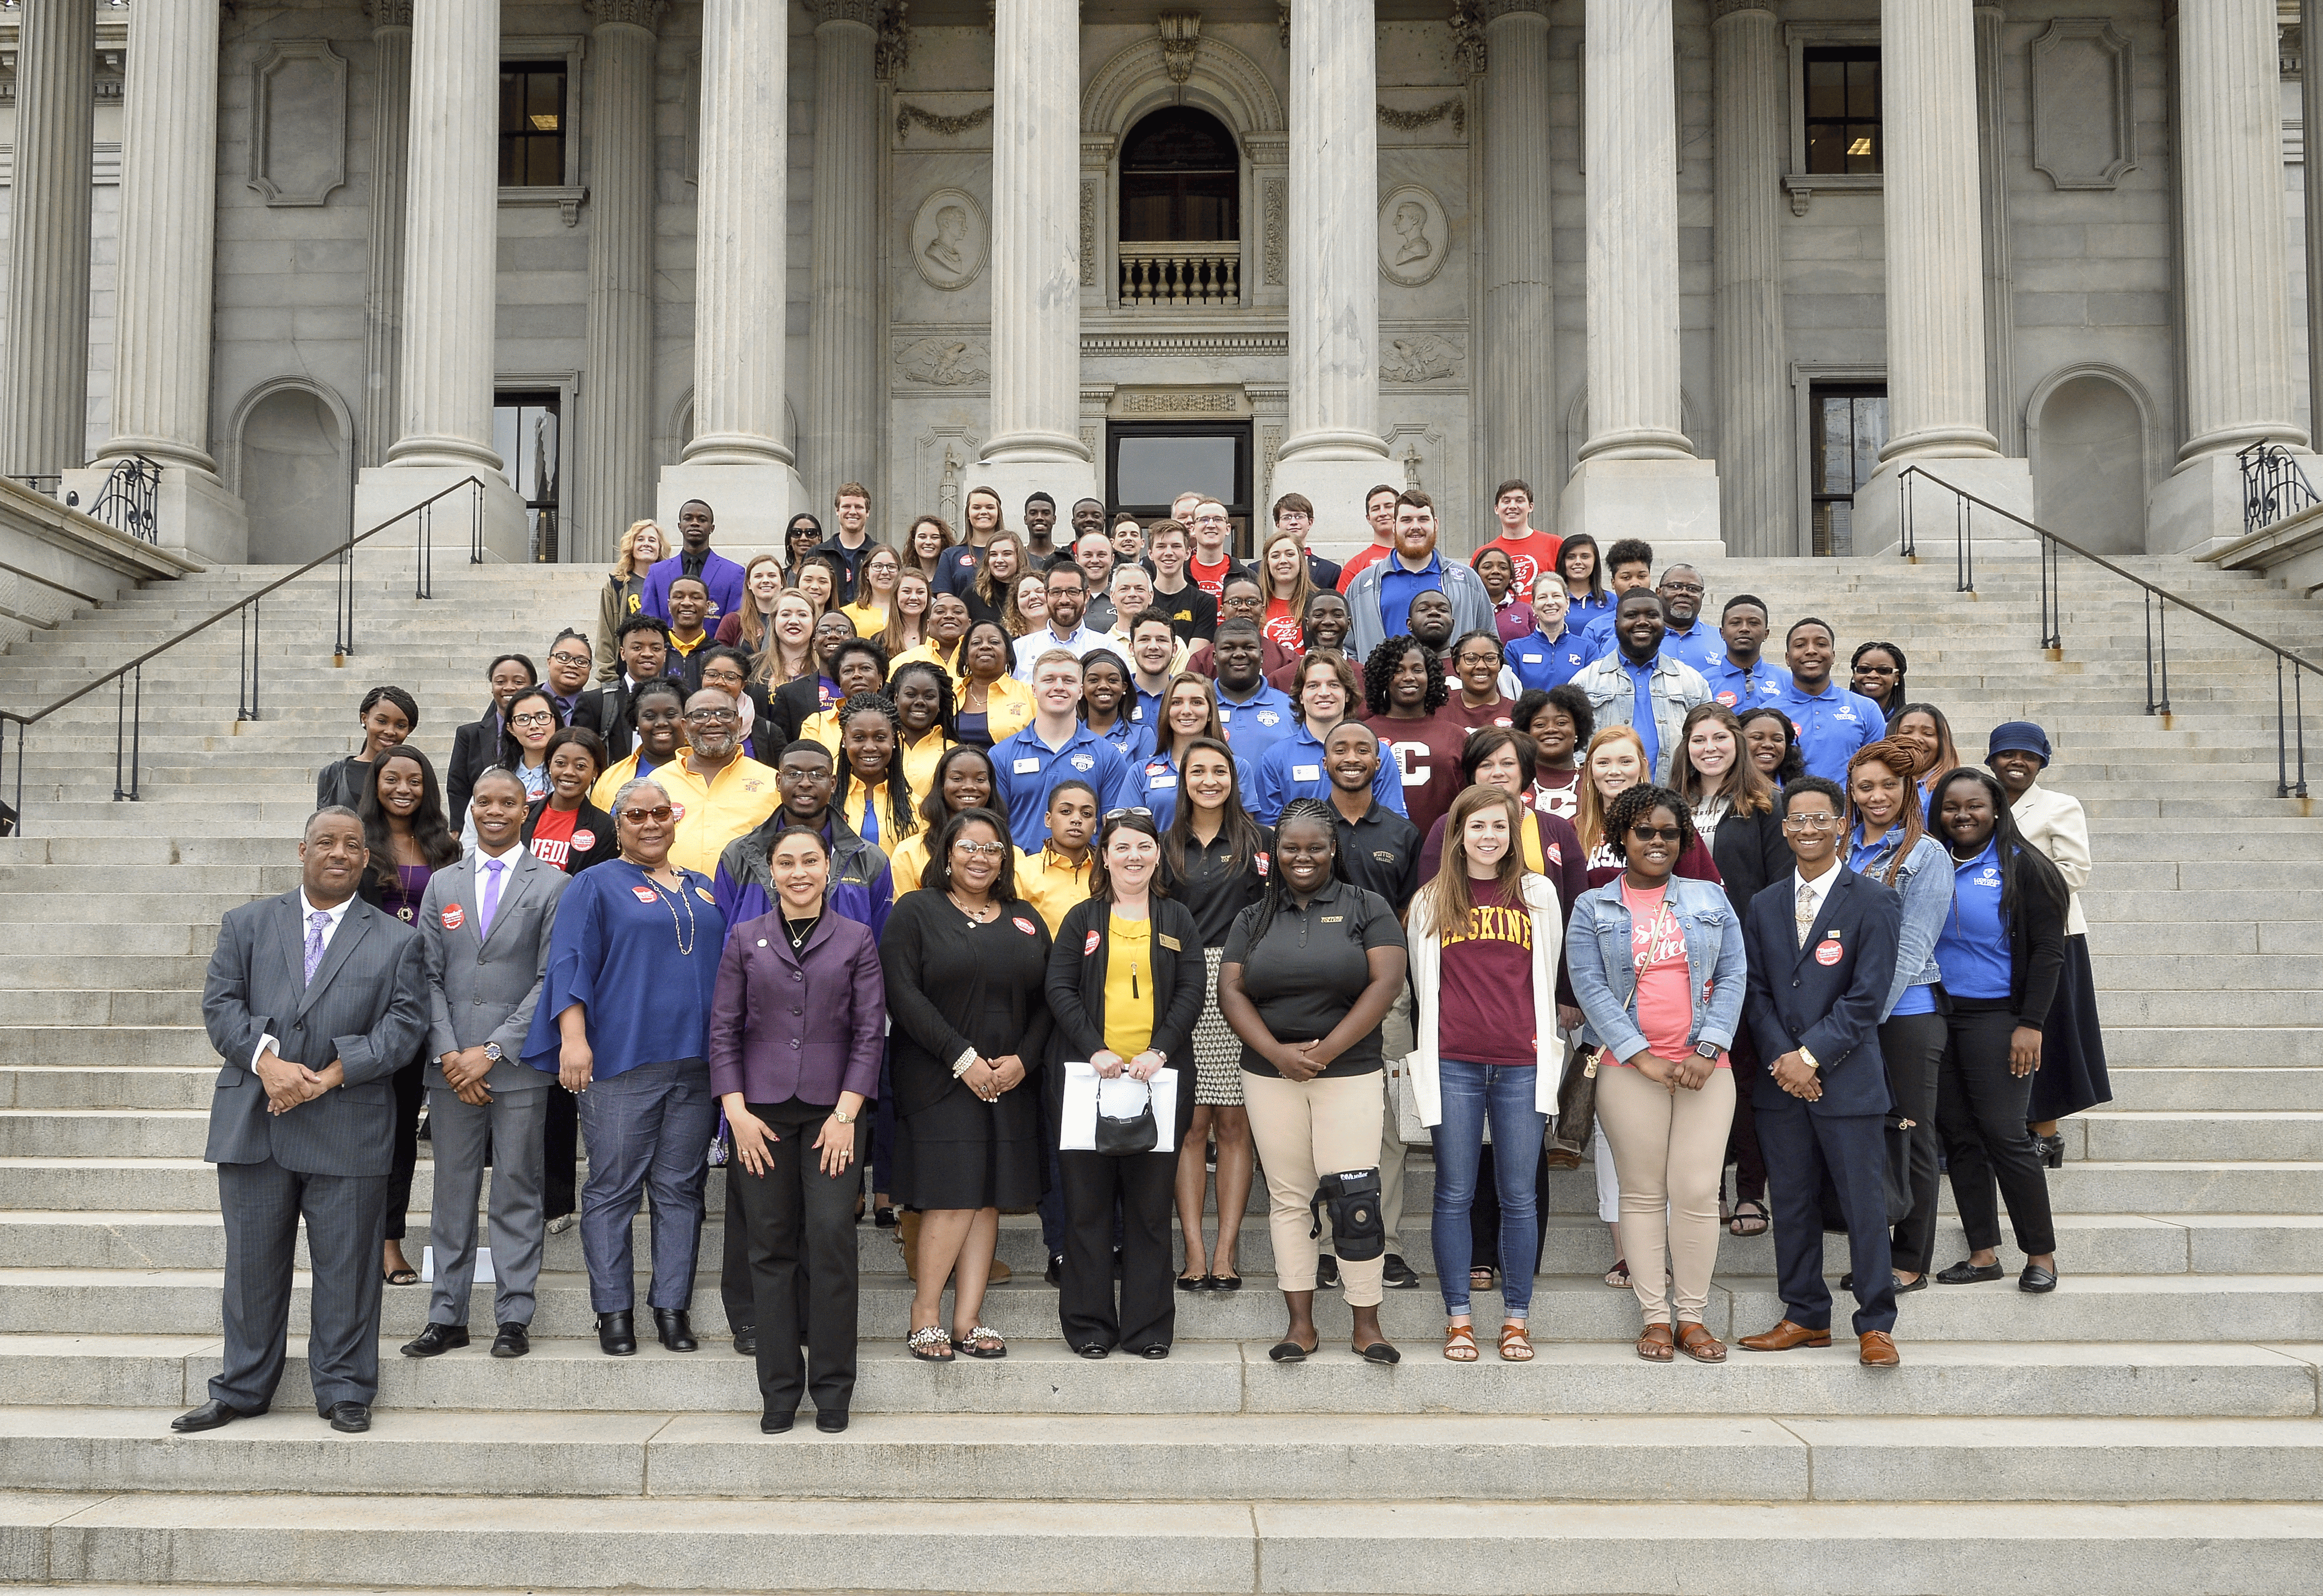 2018 State House Day Group Photo